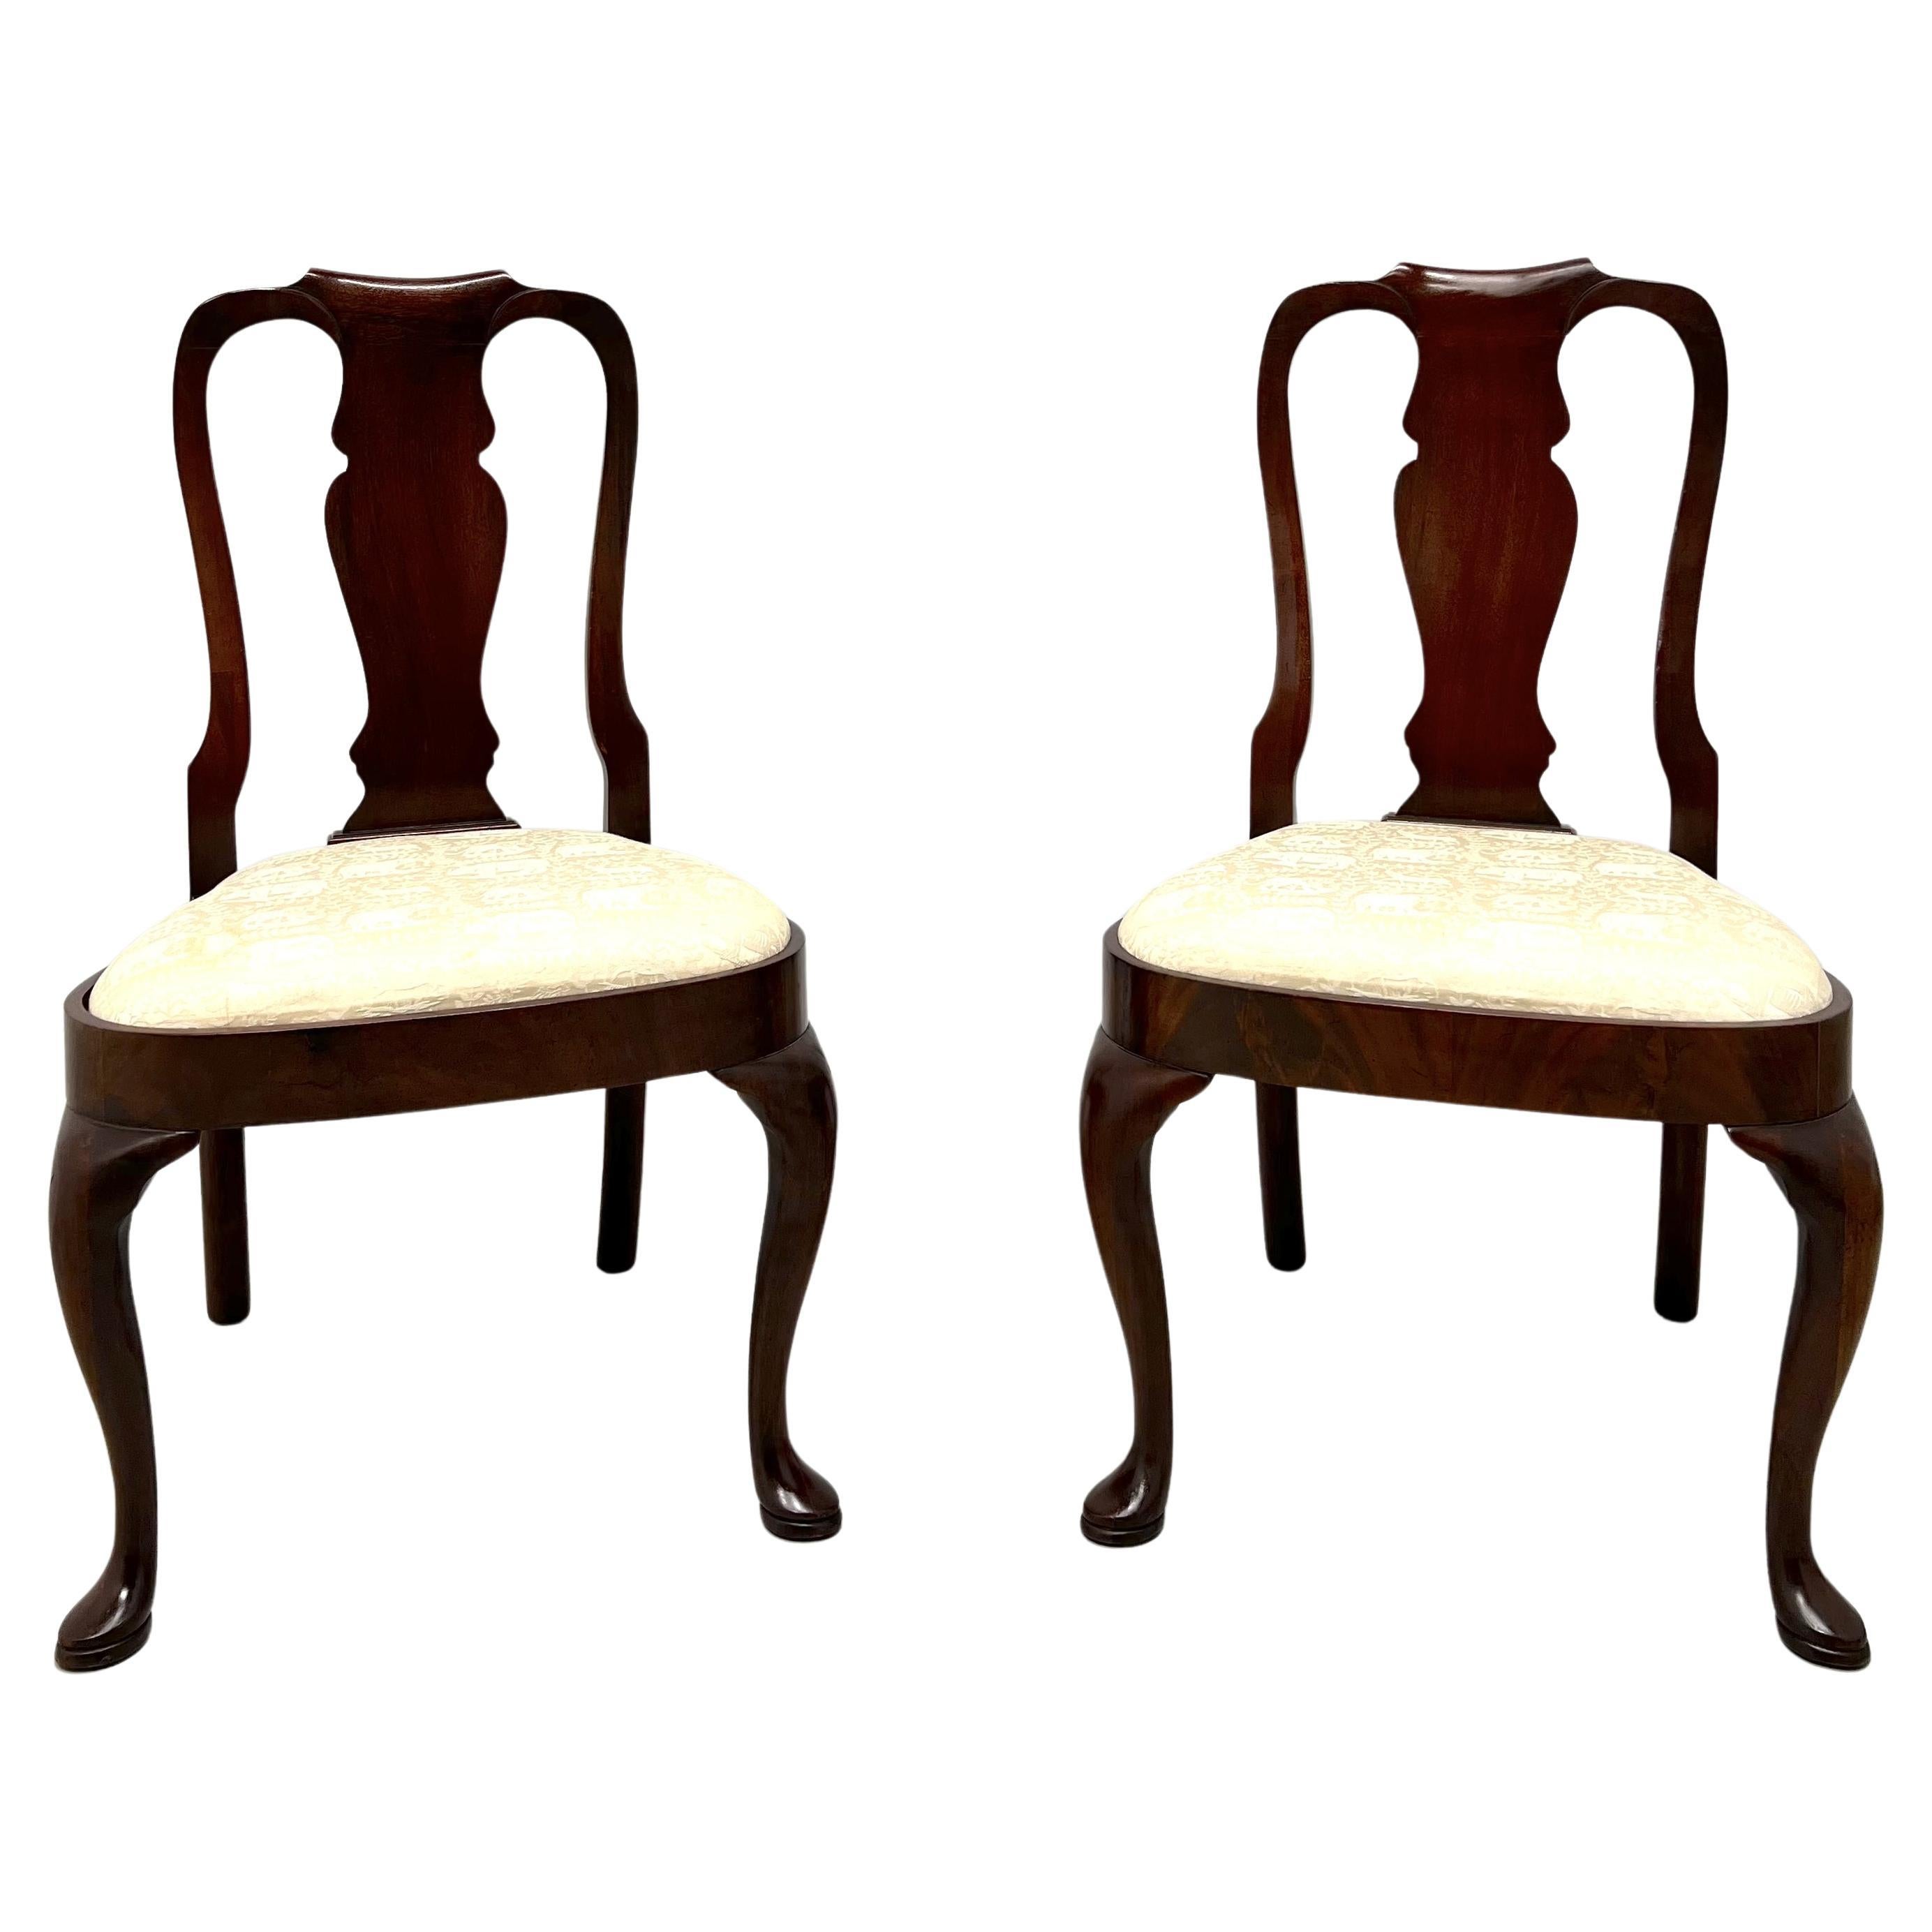 HICKORY CHAIR Mahogany Queen Anne Dining Side Chairs - Pair